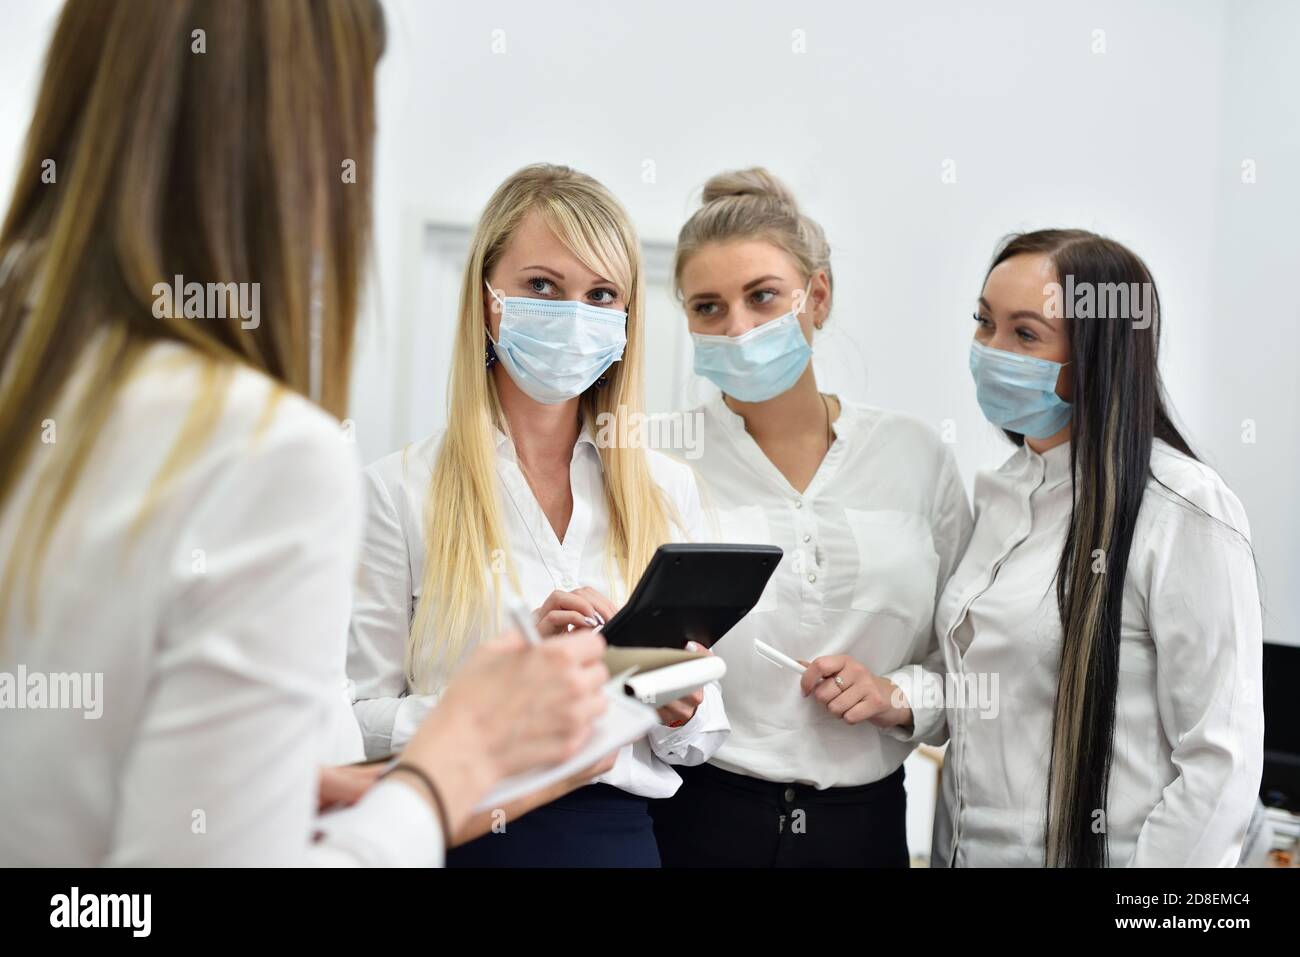 Women office managers wearing face masks at a meeting in the office counting expenses on a calculator Stock Photo